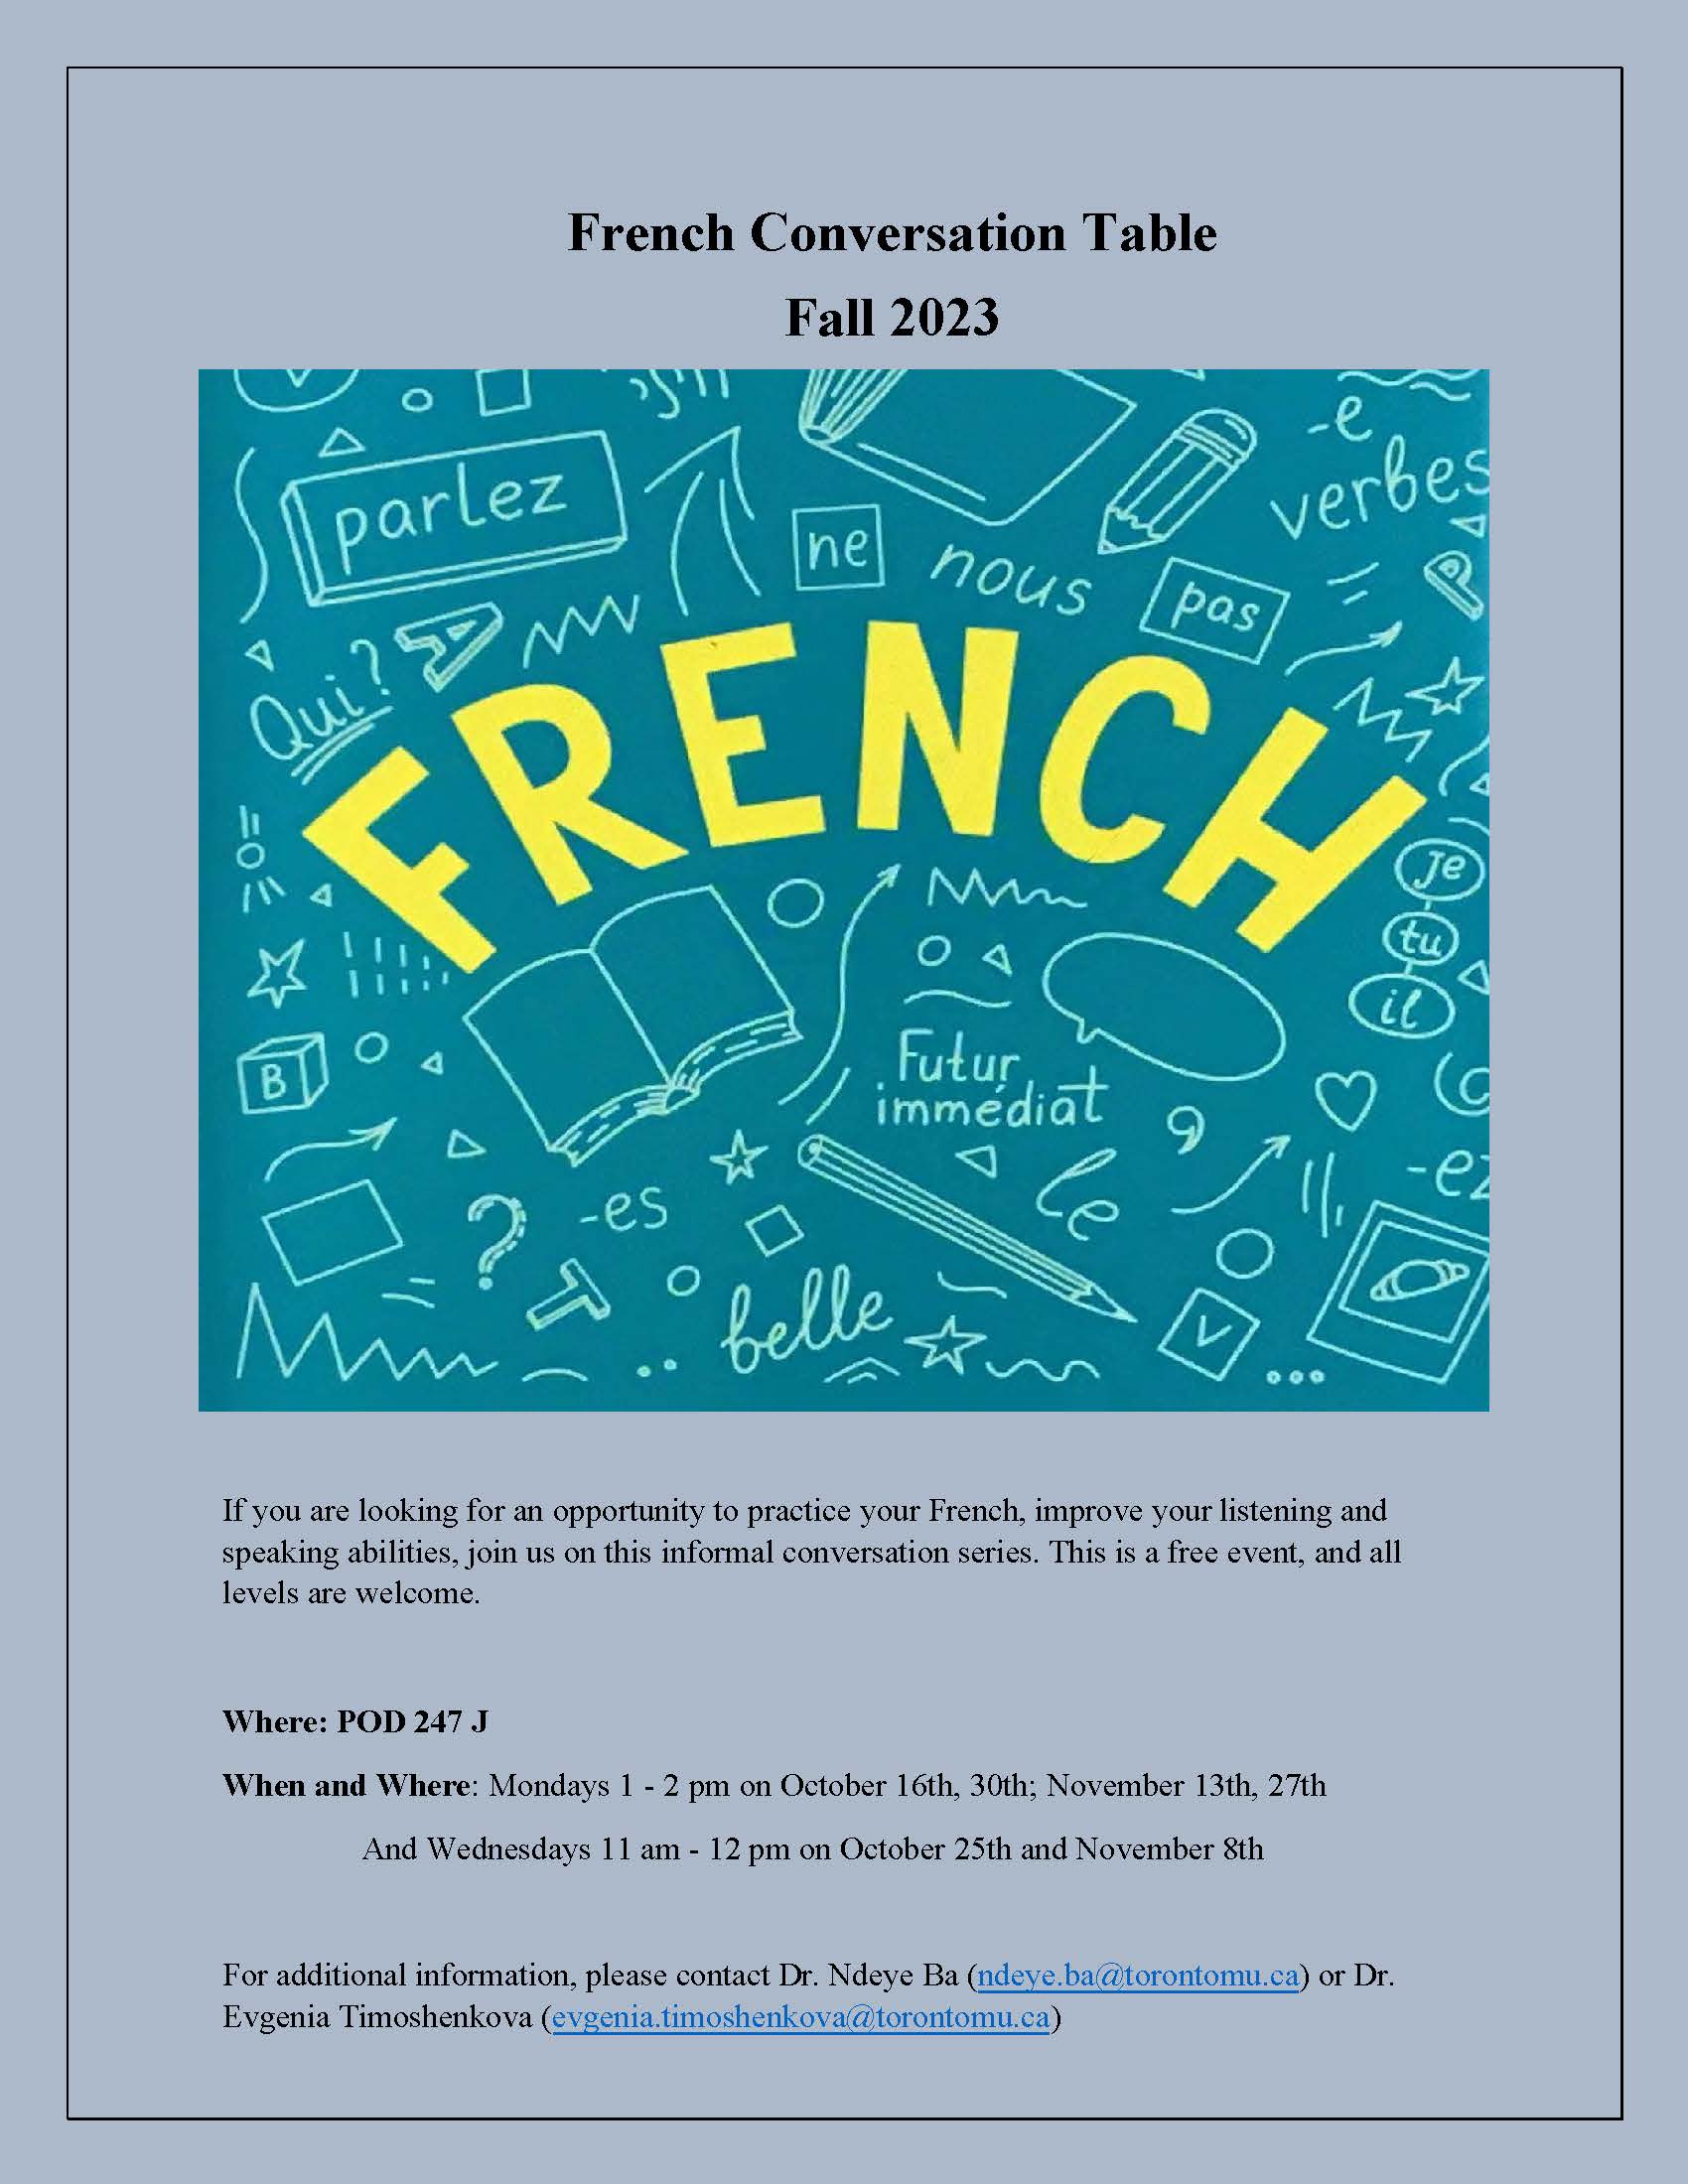 French Conversation Table for Fall 2023.